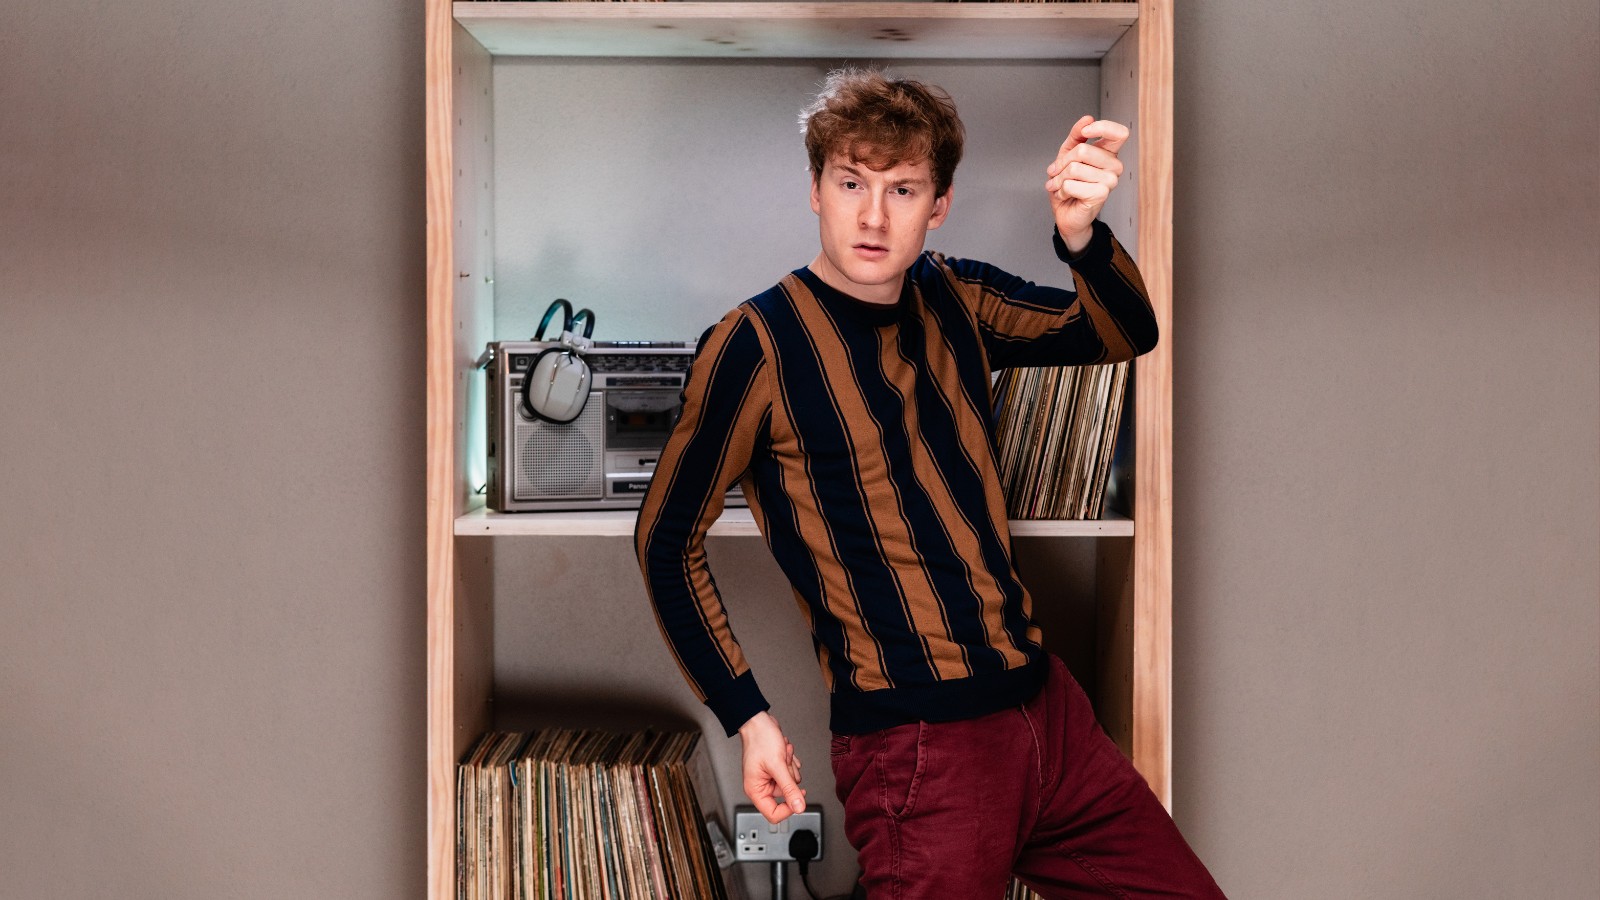 James Acaster stands in front of shelves containing records and a radio. He wears red trousers and an orange and black striped top.